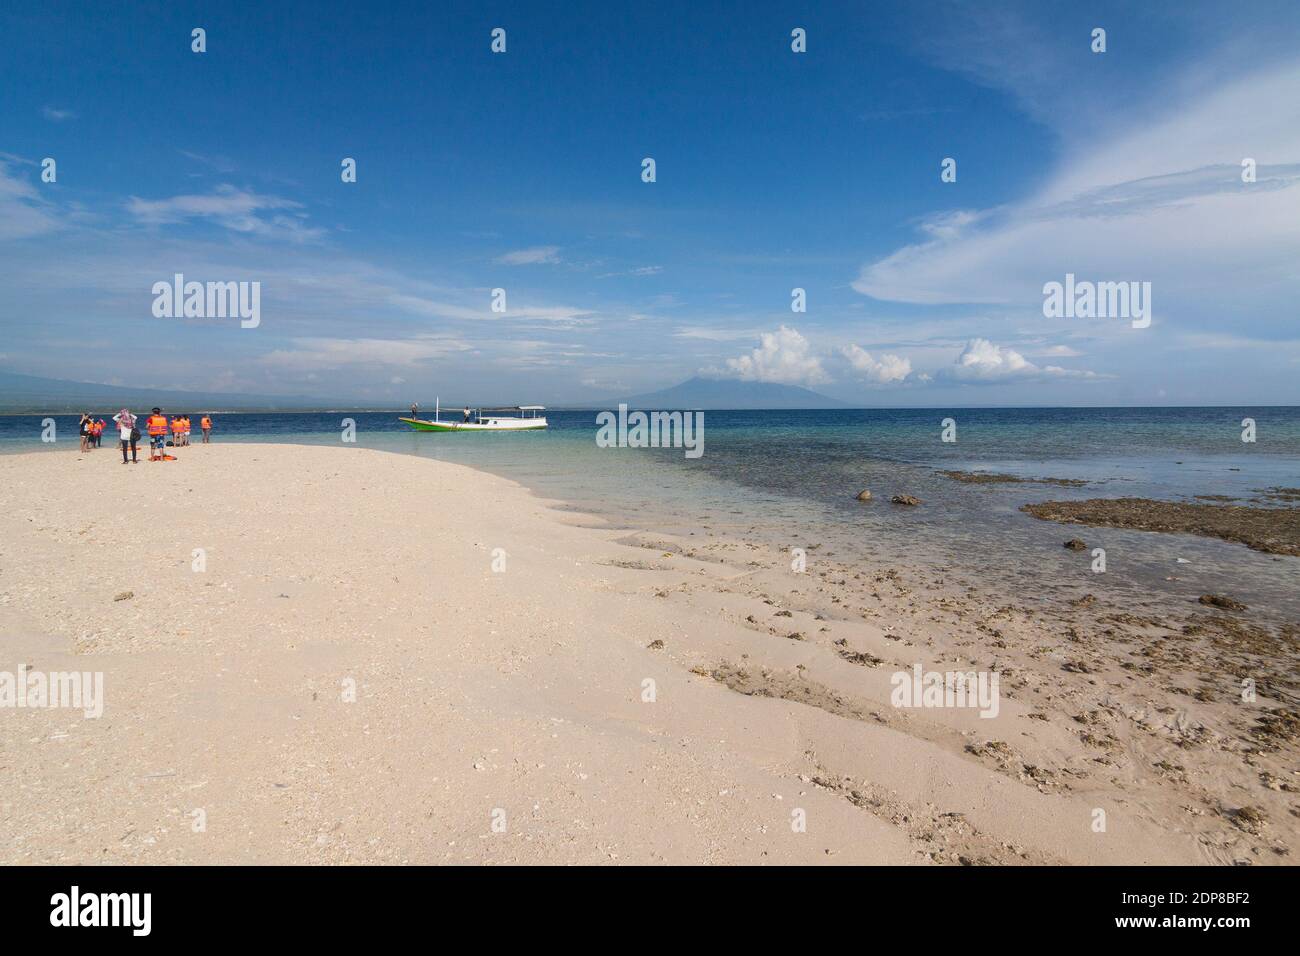 The tourists arrive at Tabuhan Island, one of the marine tourism destinations in Banyuwangi district. Stock Photo